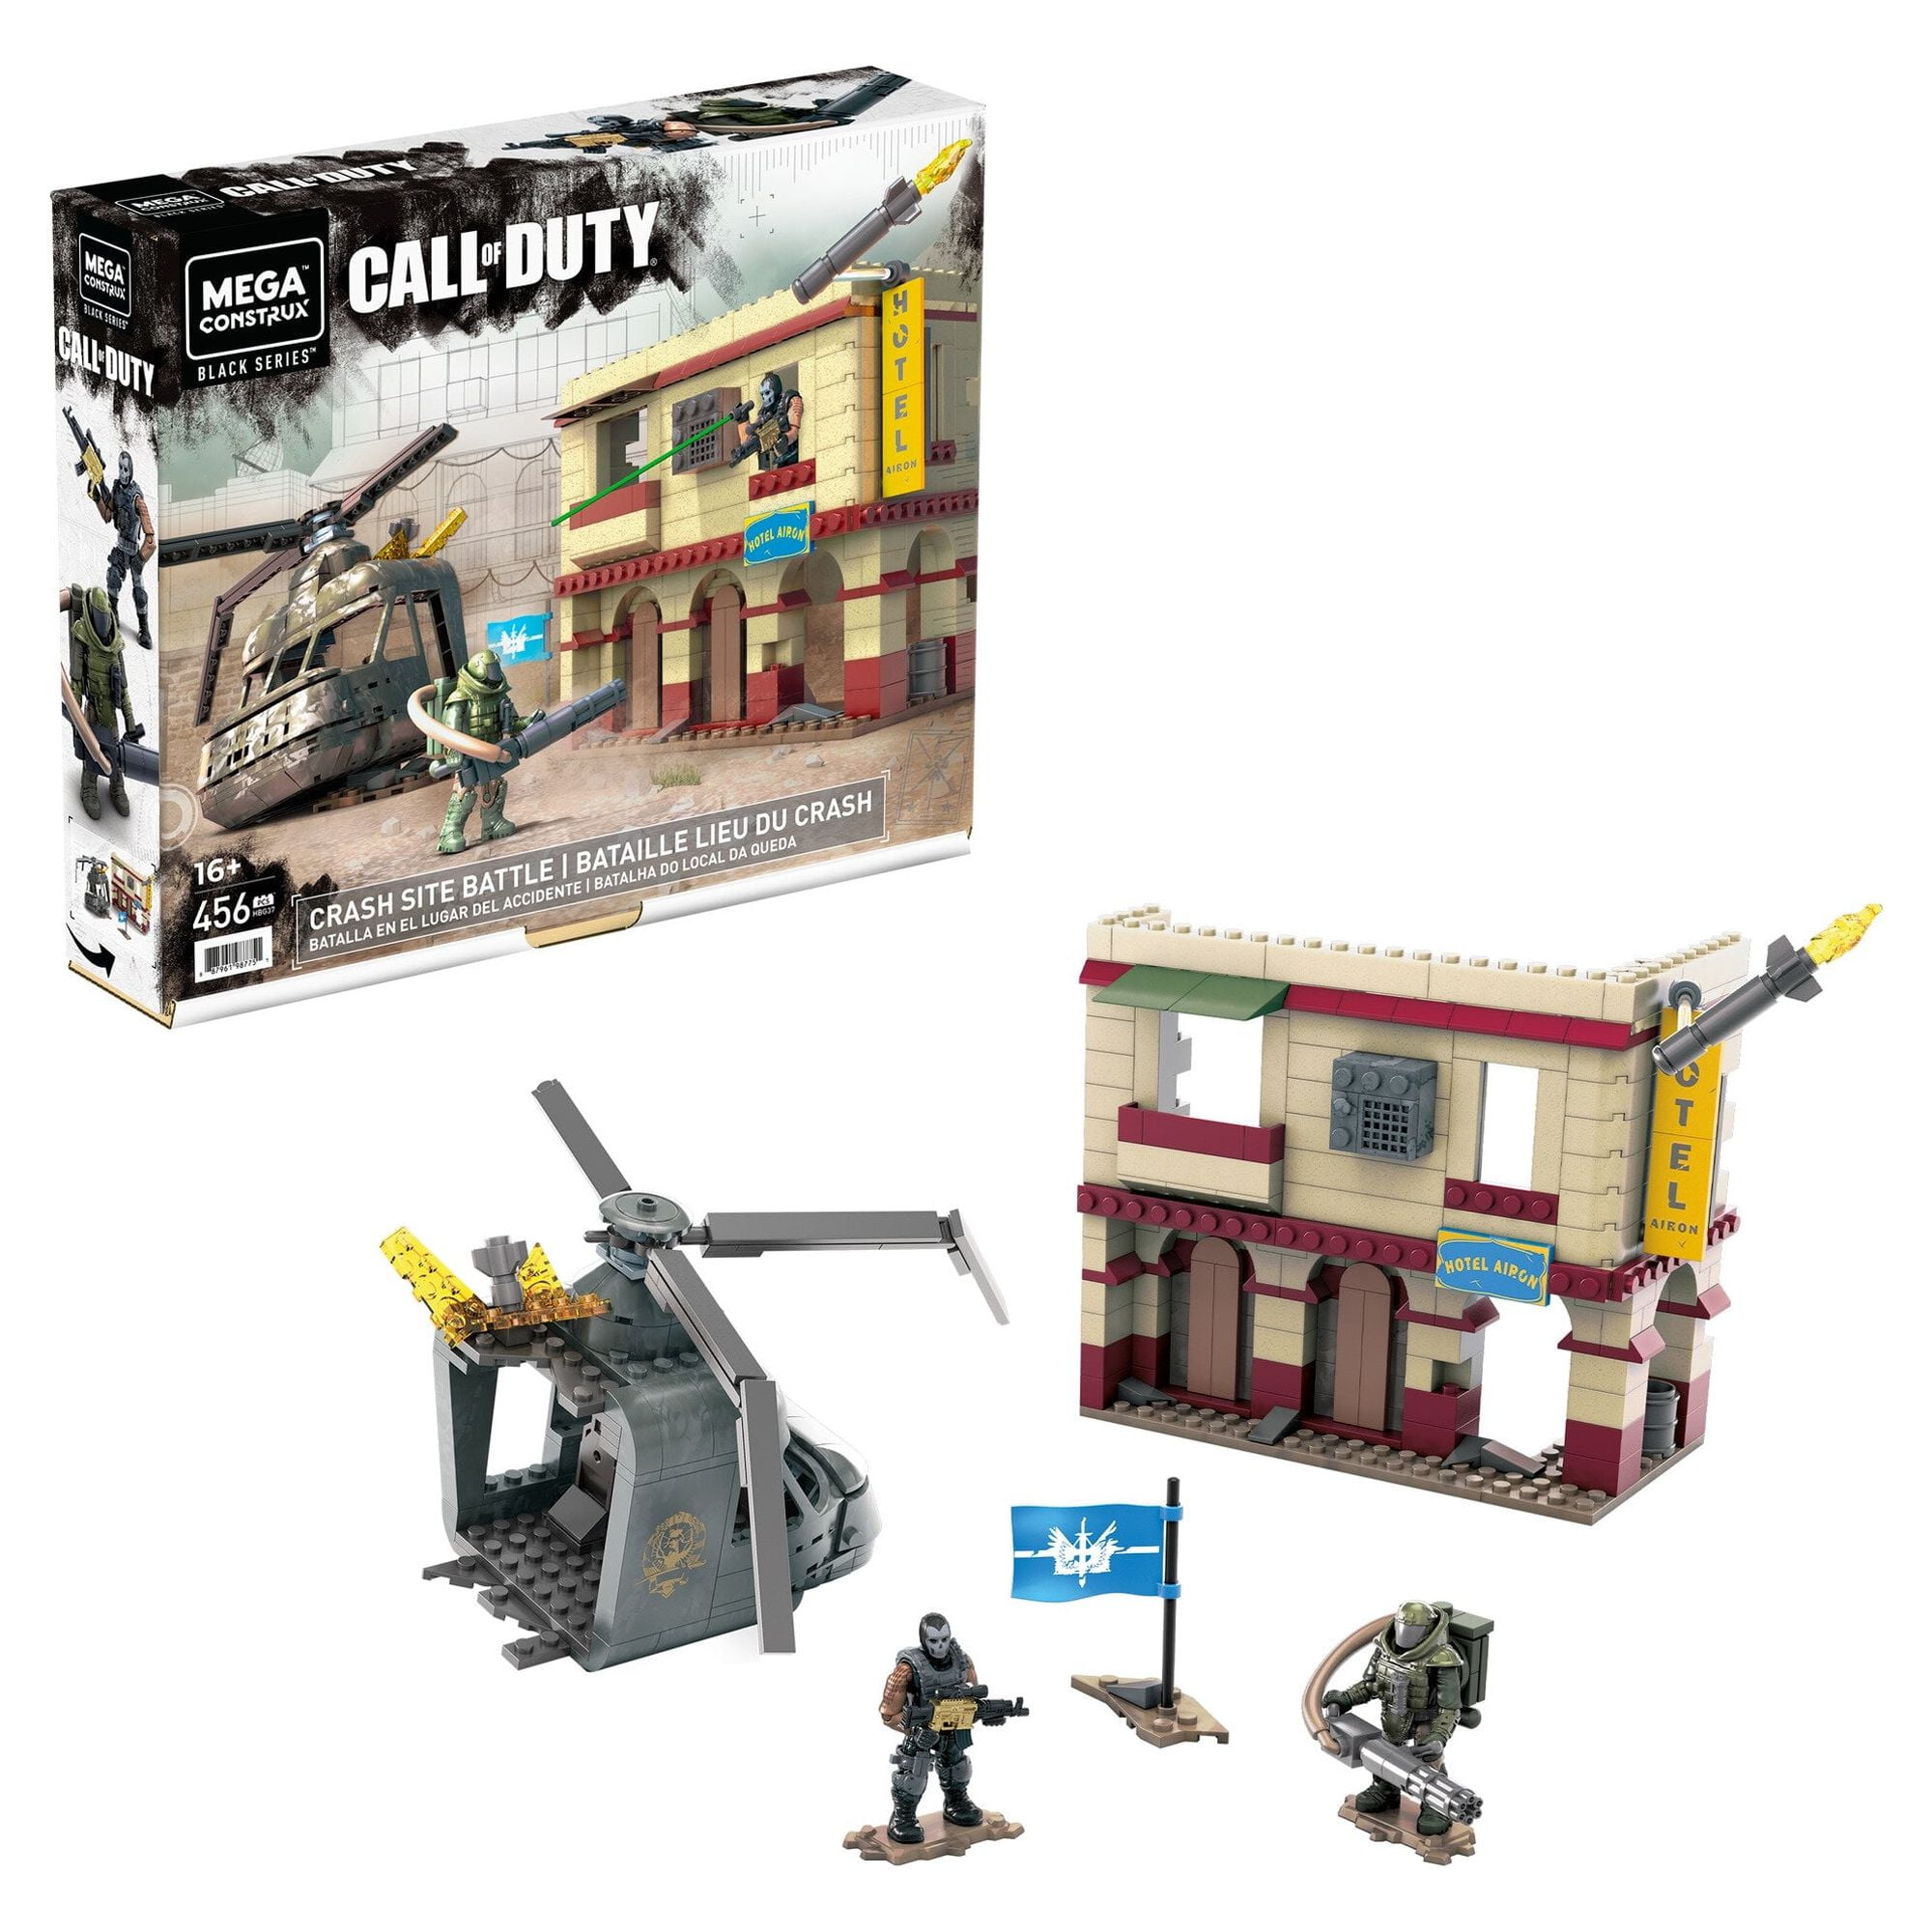 456-Piece Mega Call of Duty Crash Site Battle Building Toy w/ 2 Figures $10.20 & More + Free S&H w/ Walmart+ or $35+